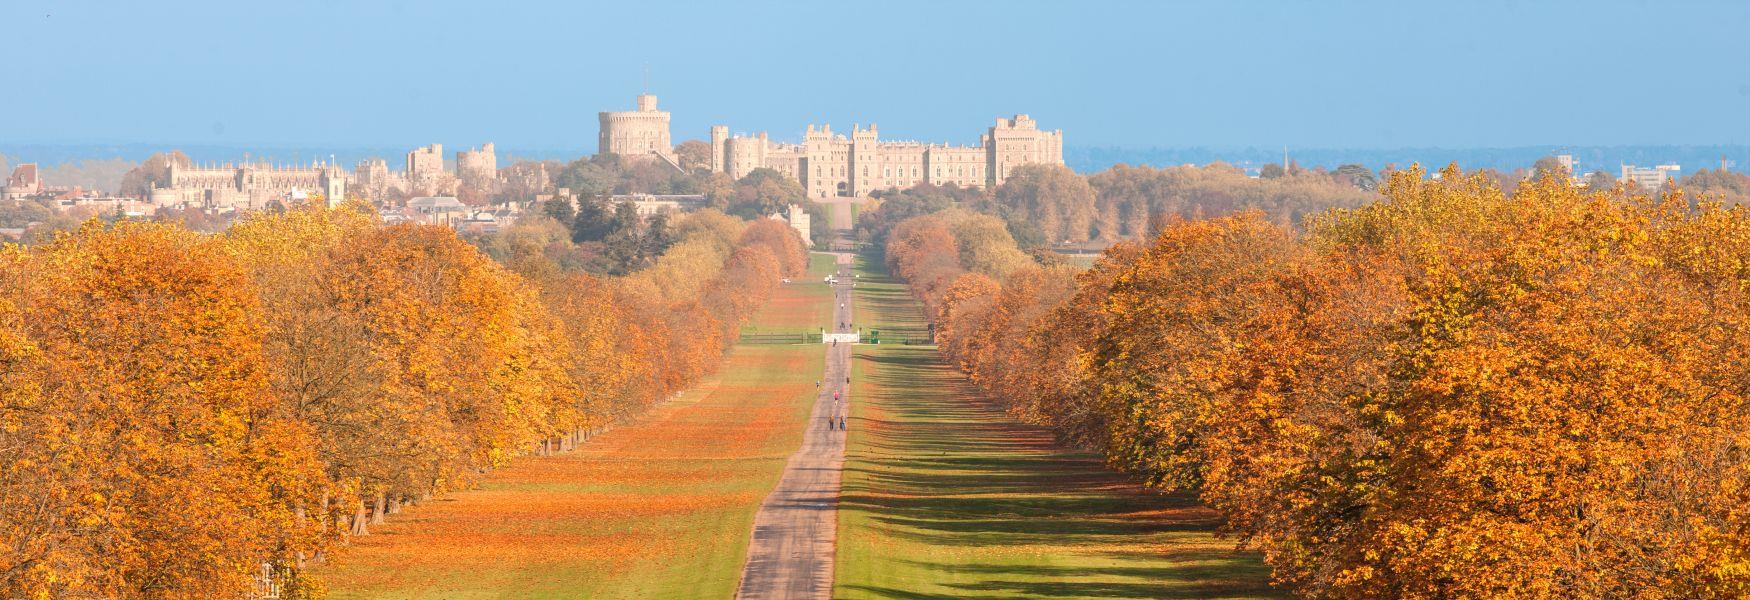 The Long Walk, Windsor Great Park, with view of Windsor Castle